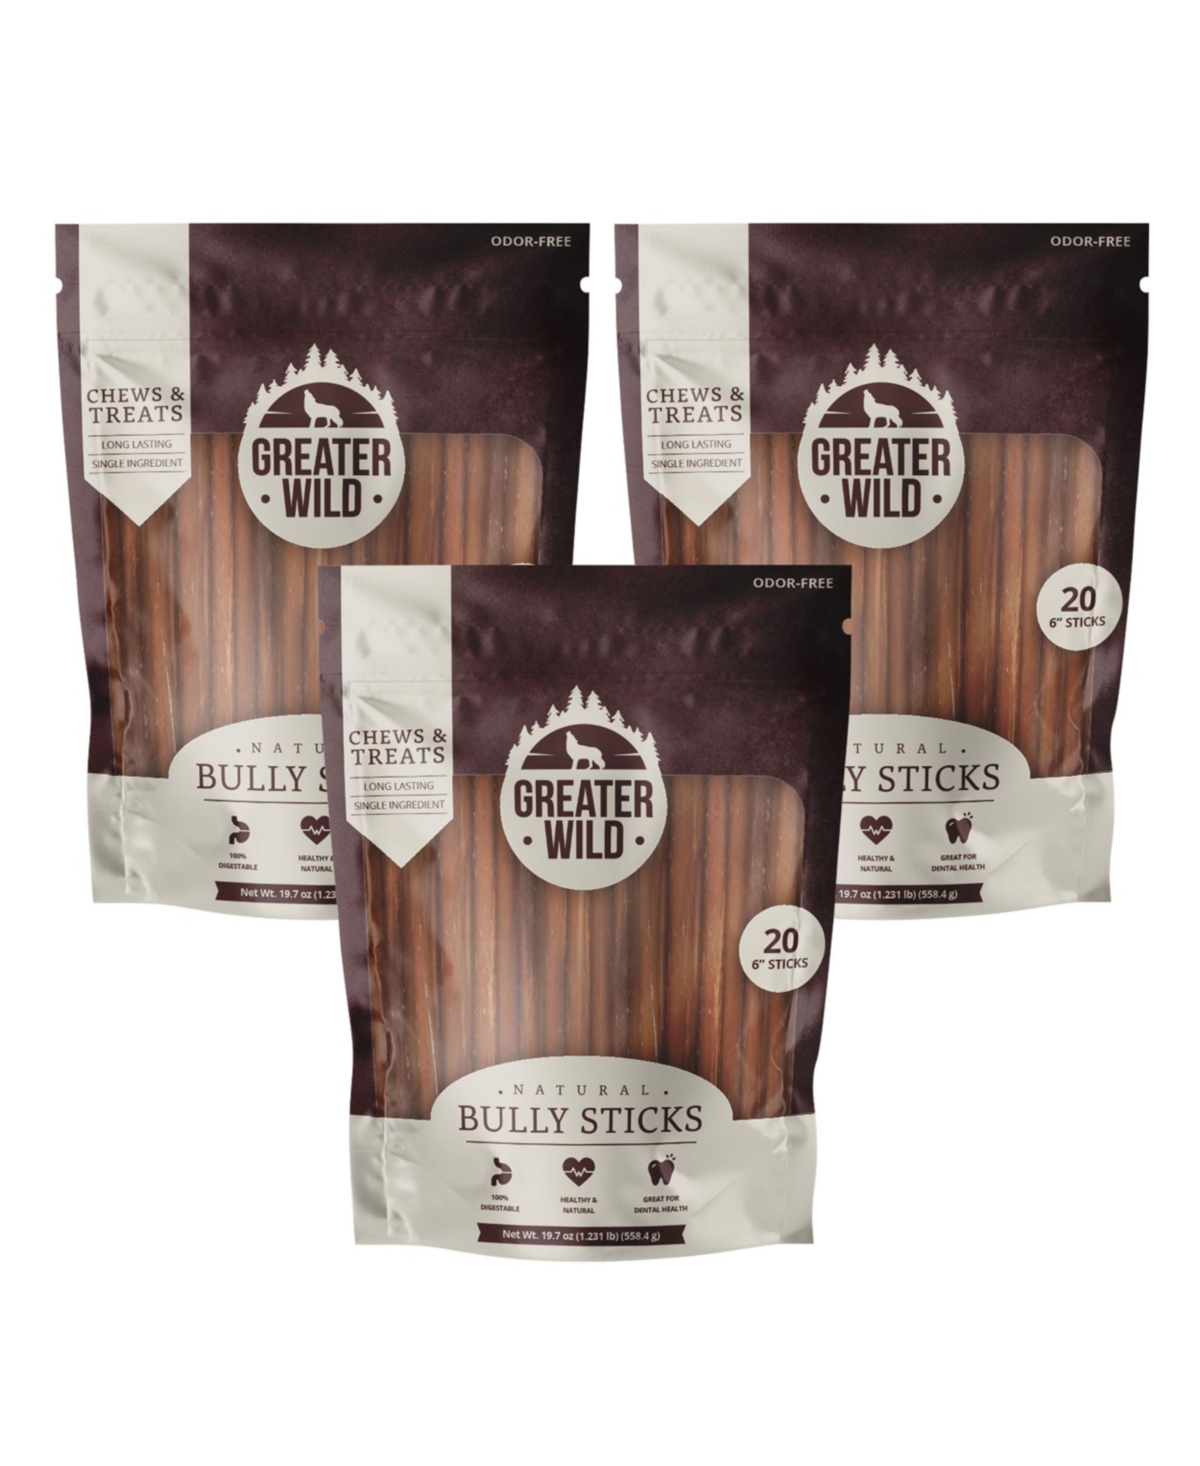 6" Single-Ingredient Beef Bully Sticks, All-Natural Dog Treats - 60 Sticks - Brown